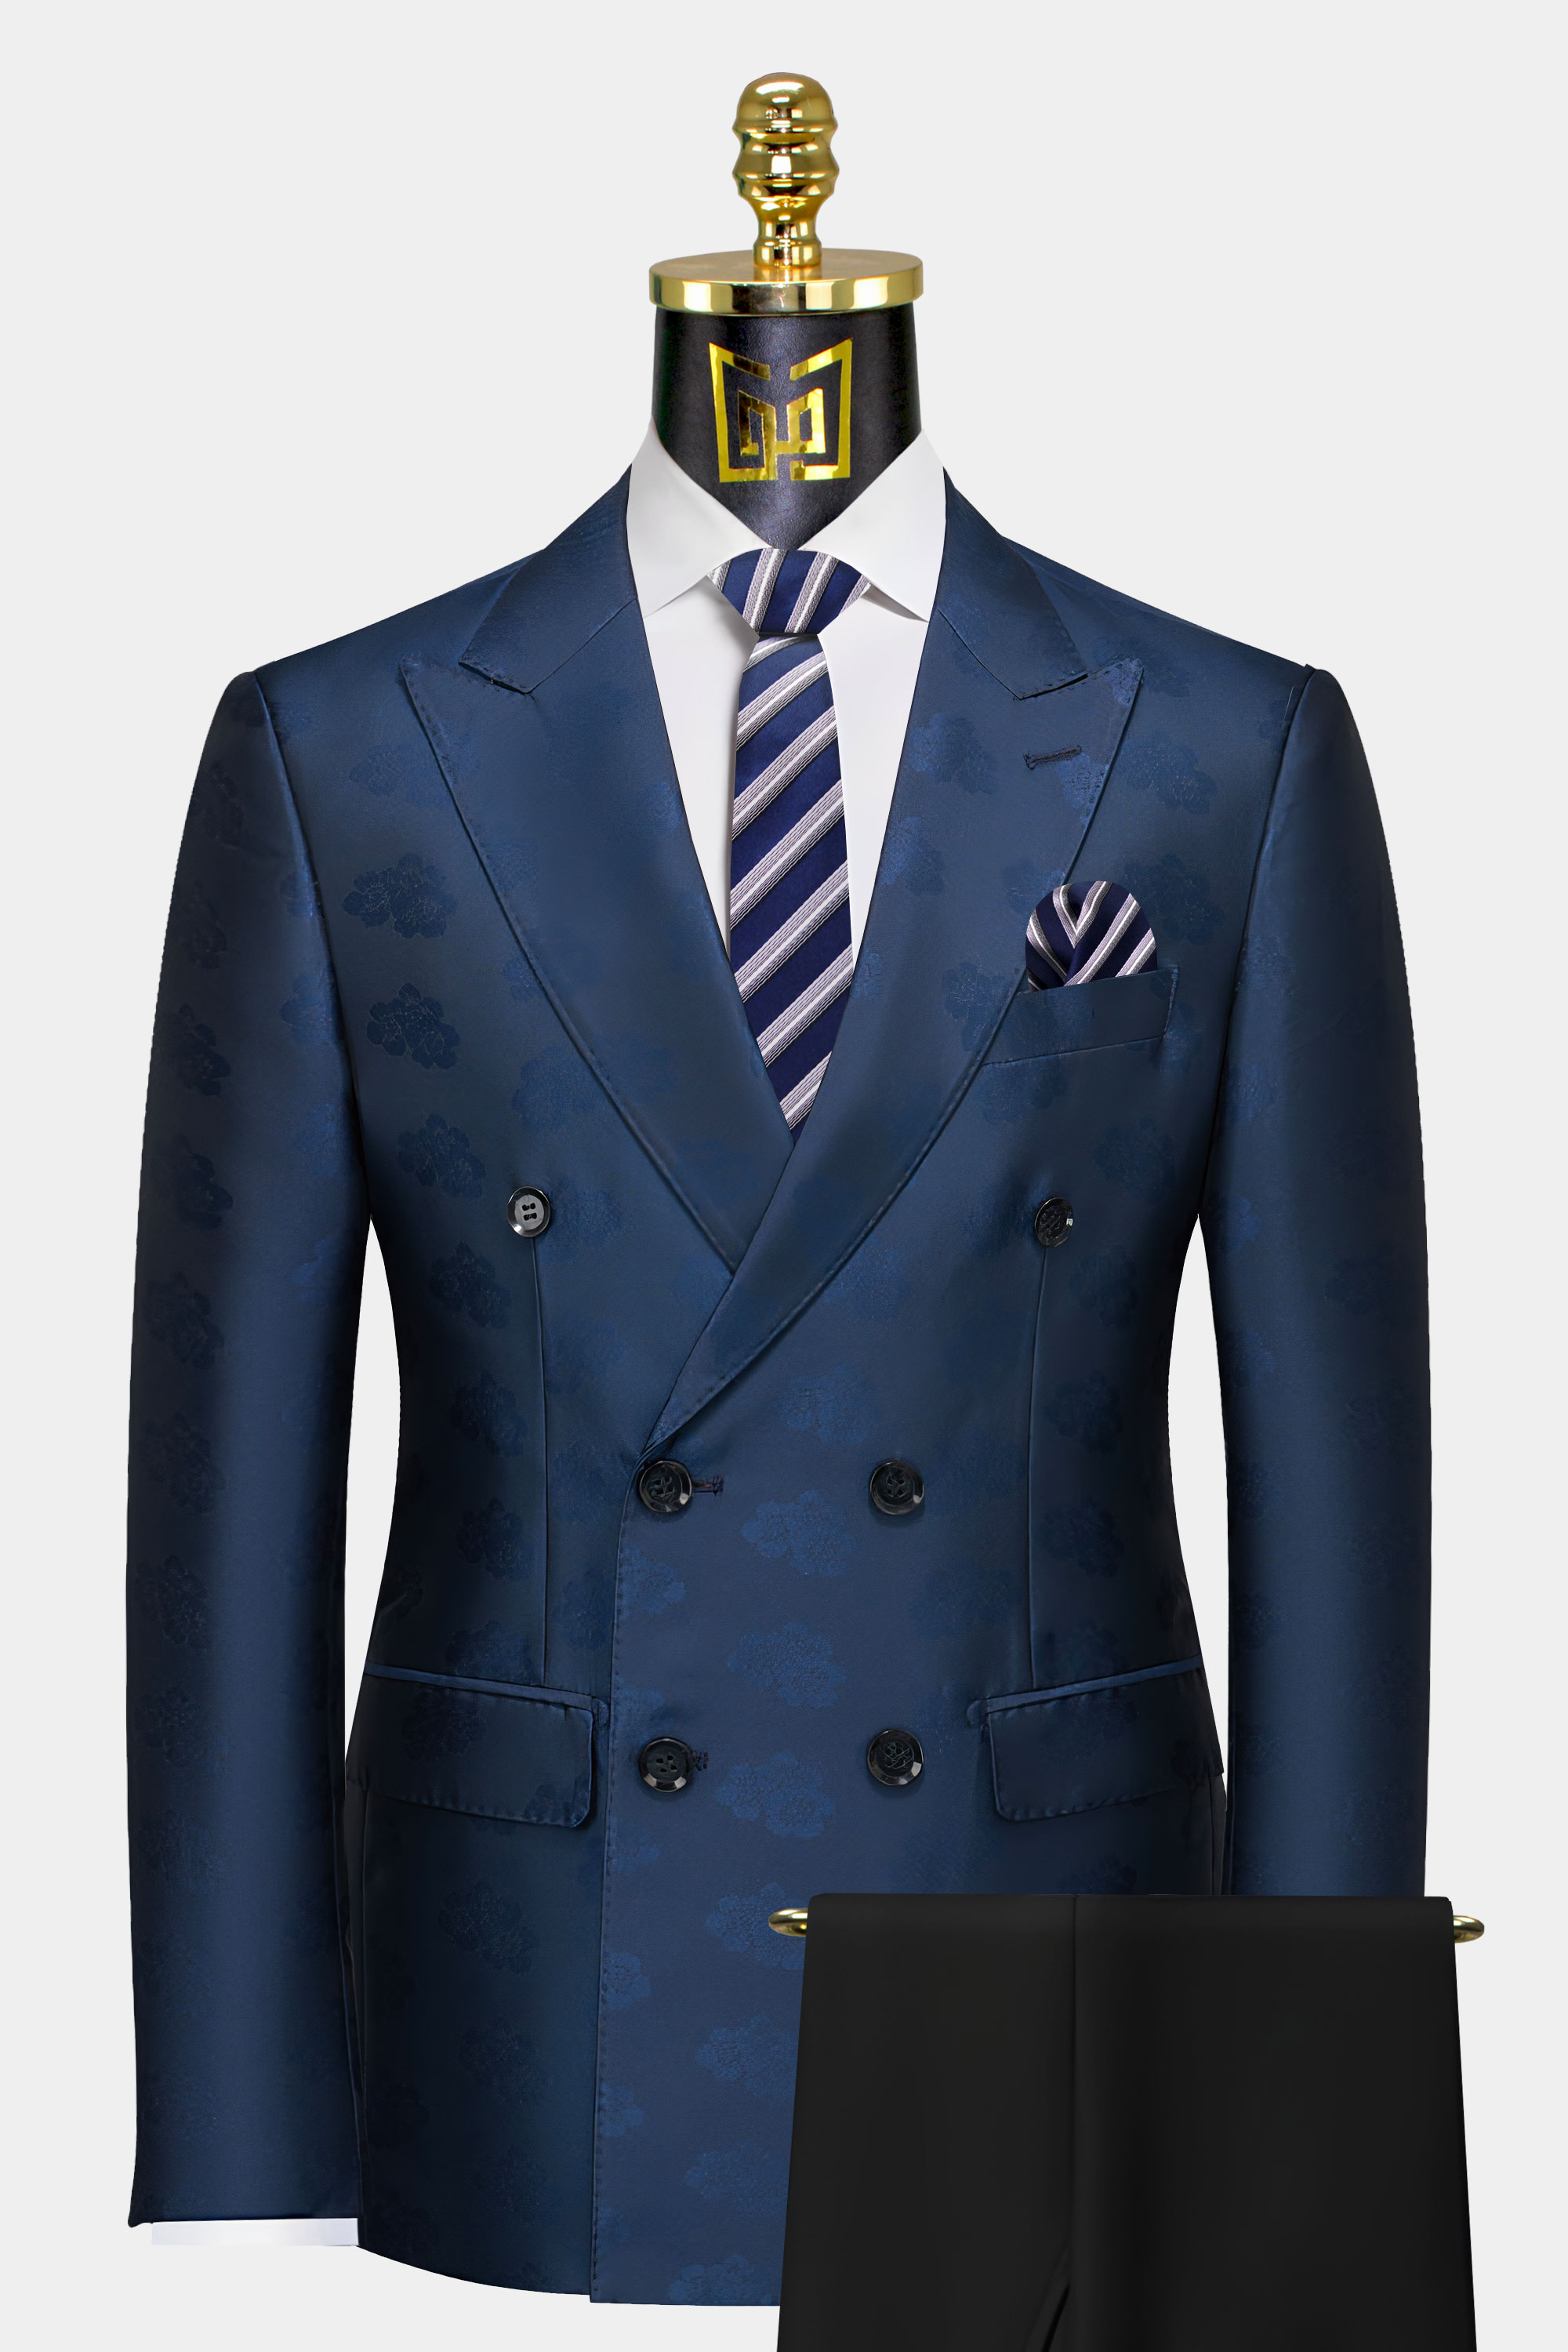 Groom Style, Blue Wedding Suit Outfit For Men